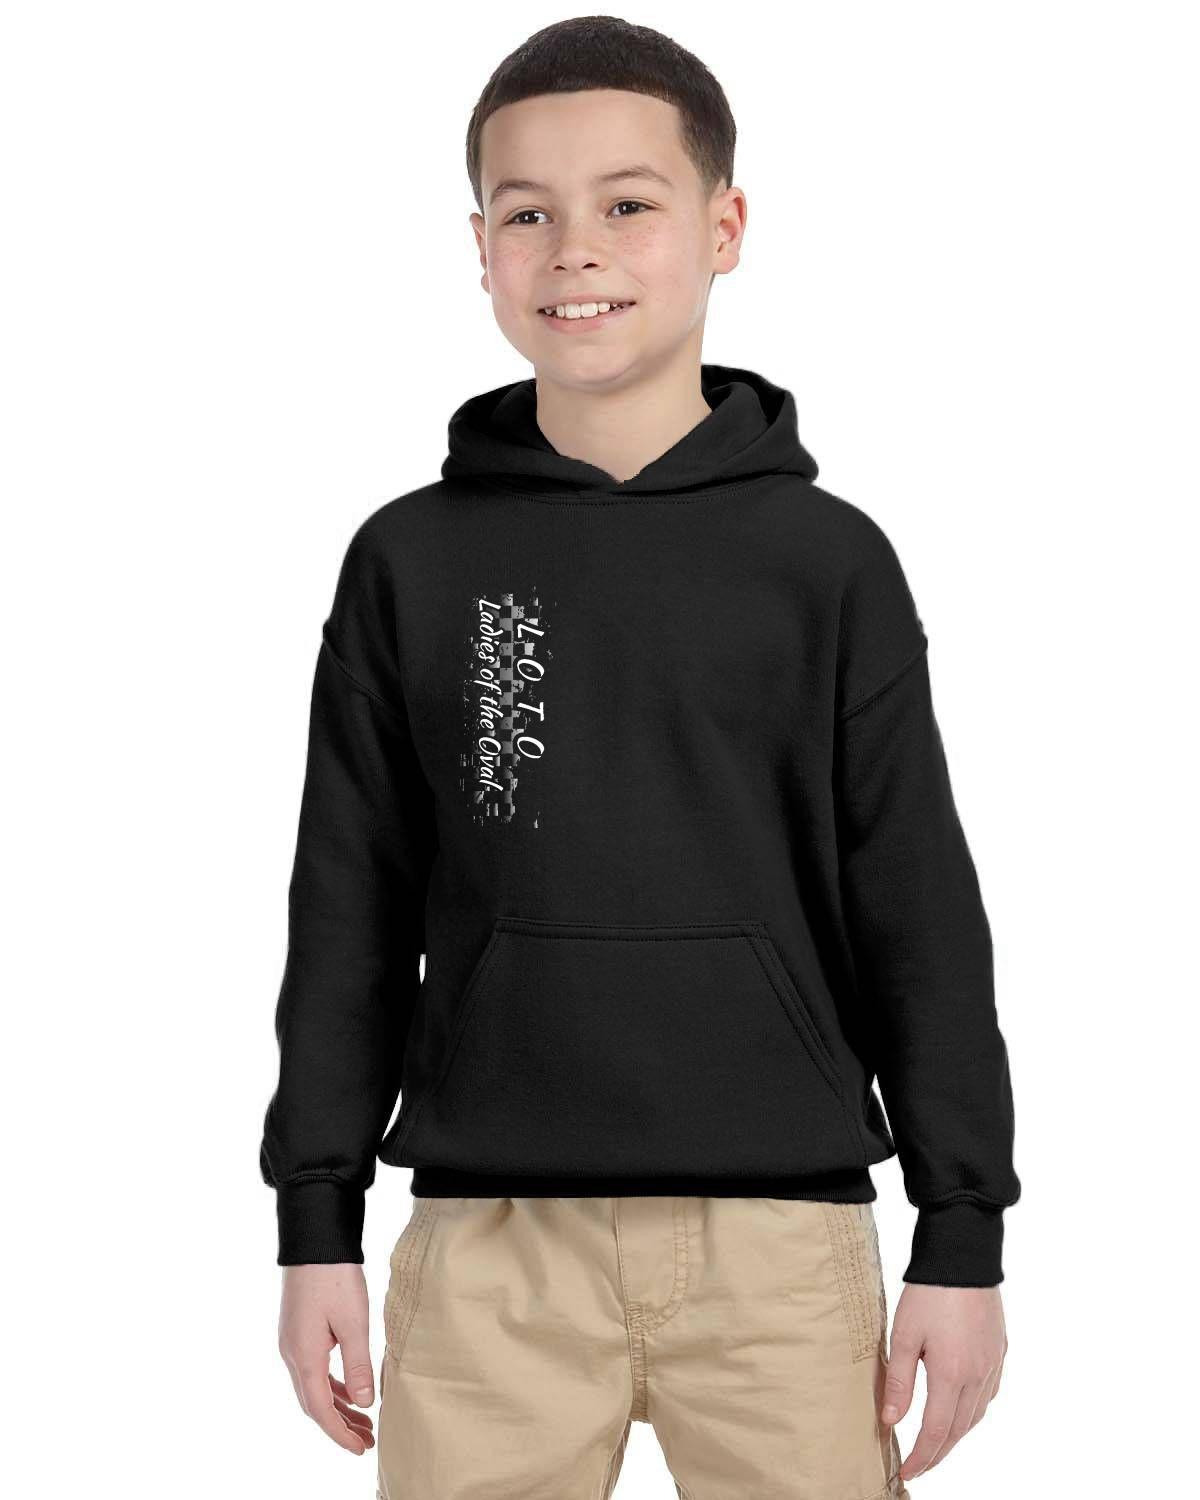 LOTO Ladies of the Oval Youth Hoodie